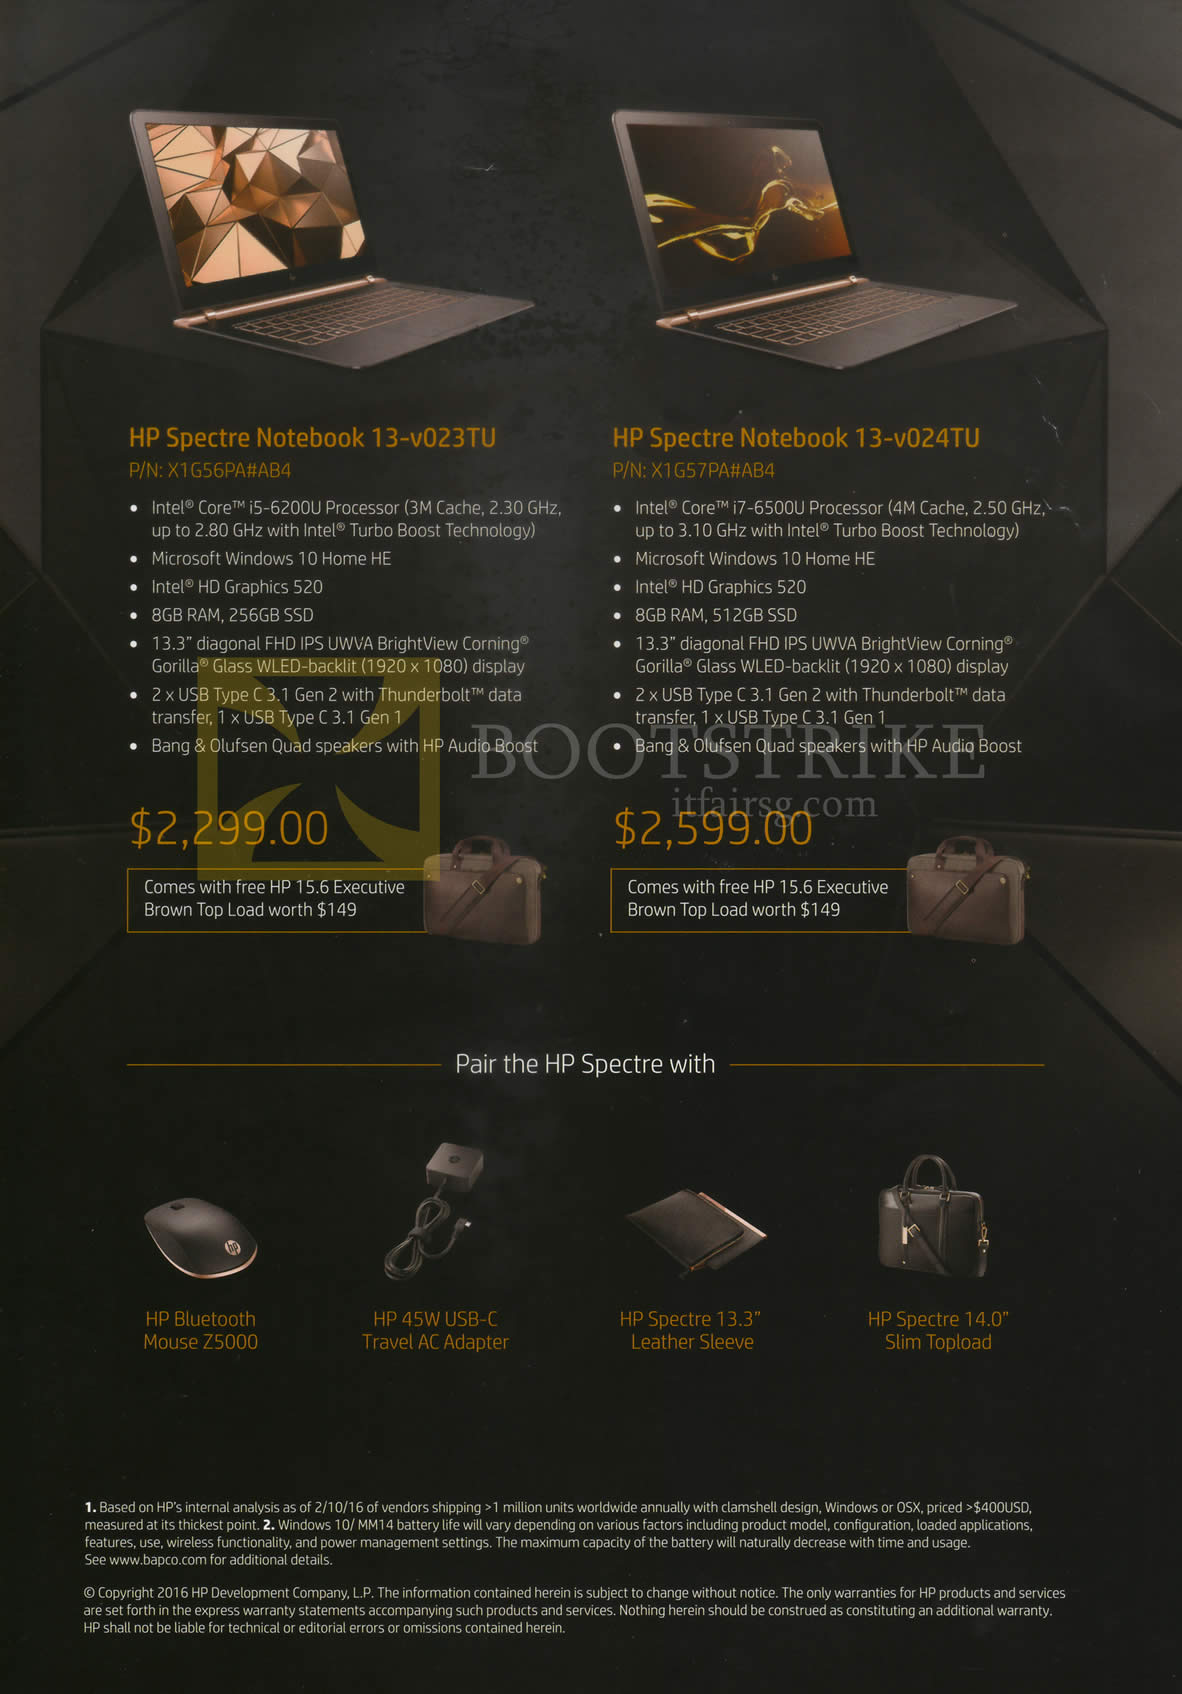 PC SHOW 2016 price list image brochure of HP Notebooks New Spectre 13-V023TU, 13-V024TU, Bluetooth Mouse Z500C, Travel Adapter, Leather Sleeve, Slim Topload